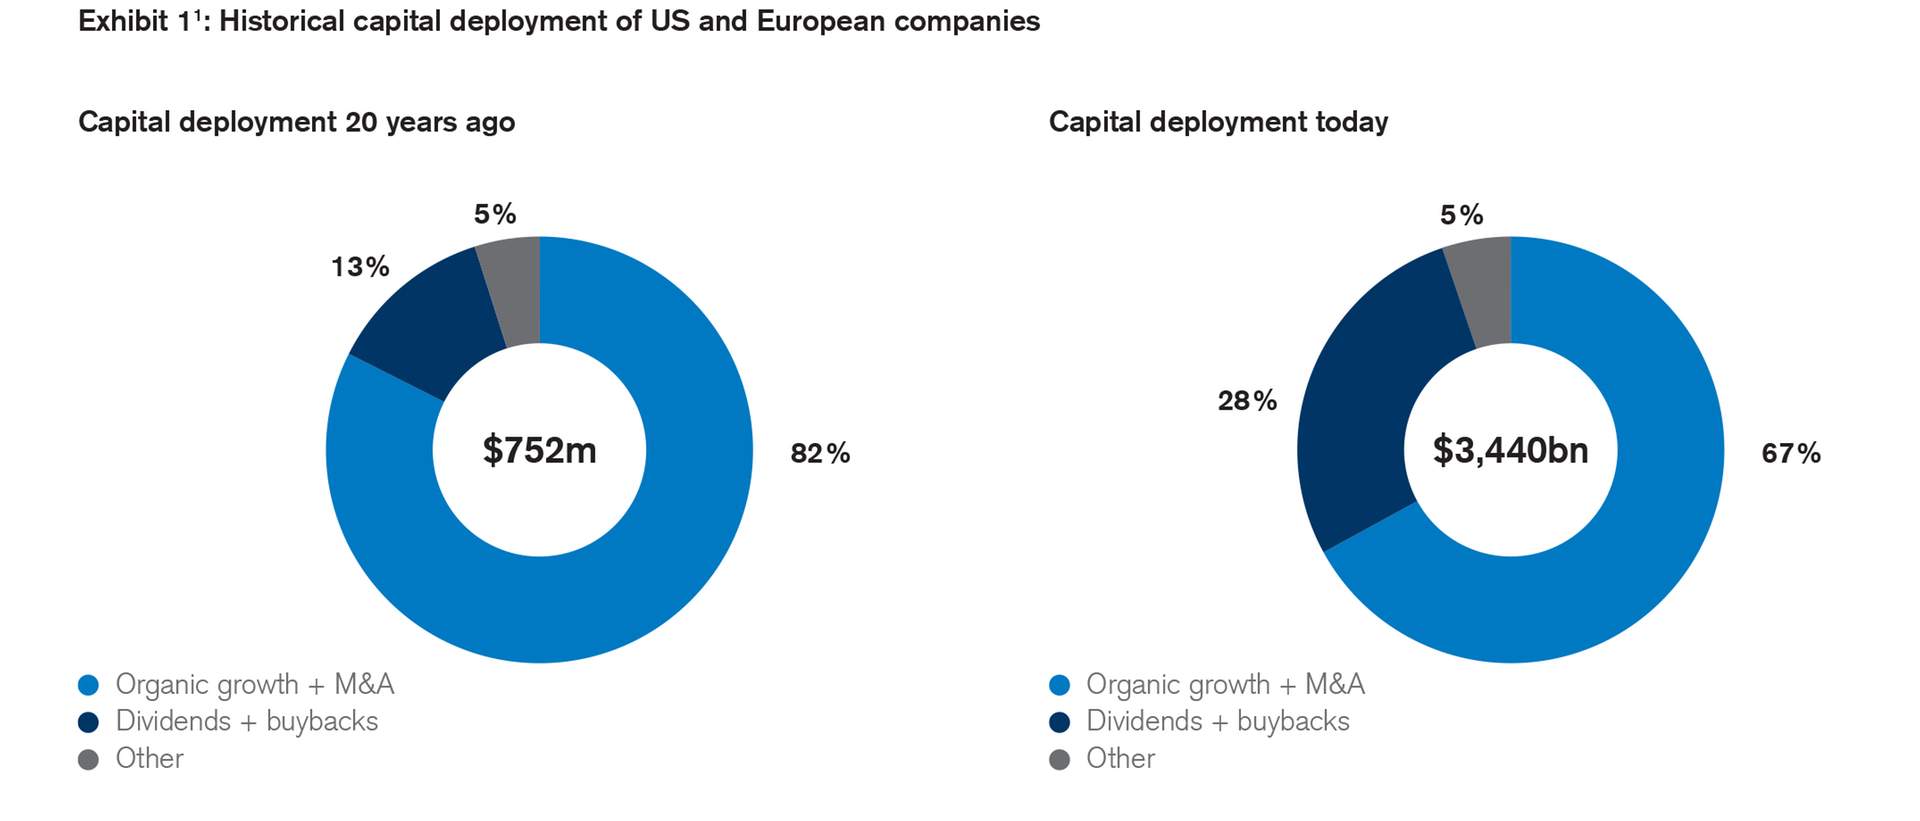 Historical capital deployment of US and European companies